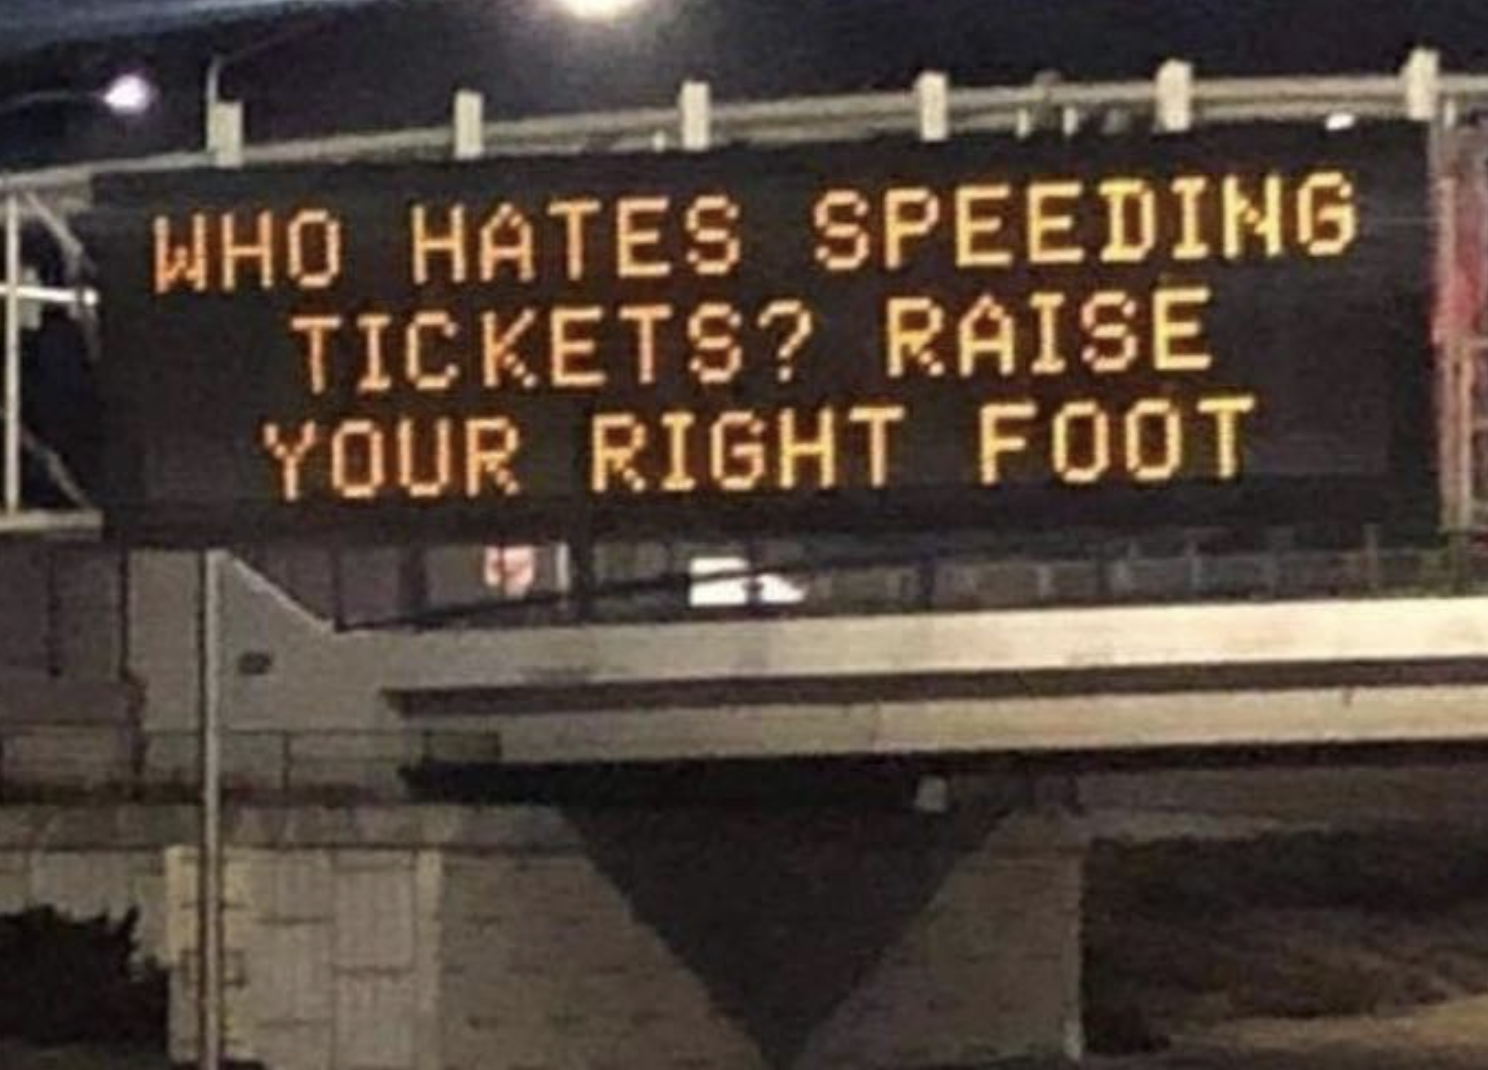 who hates speeding tickets? raise your right foot